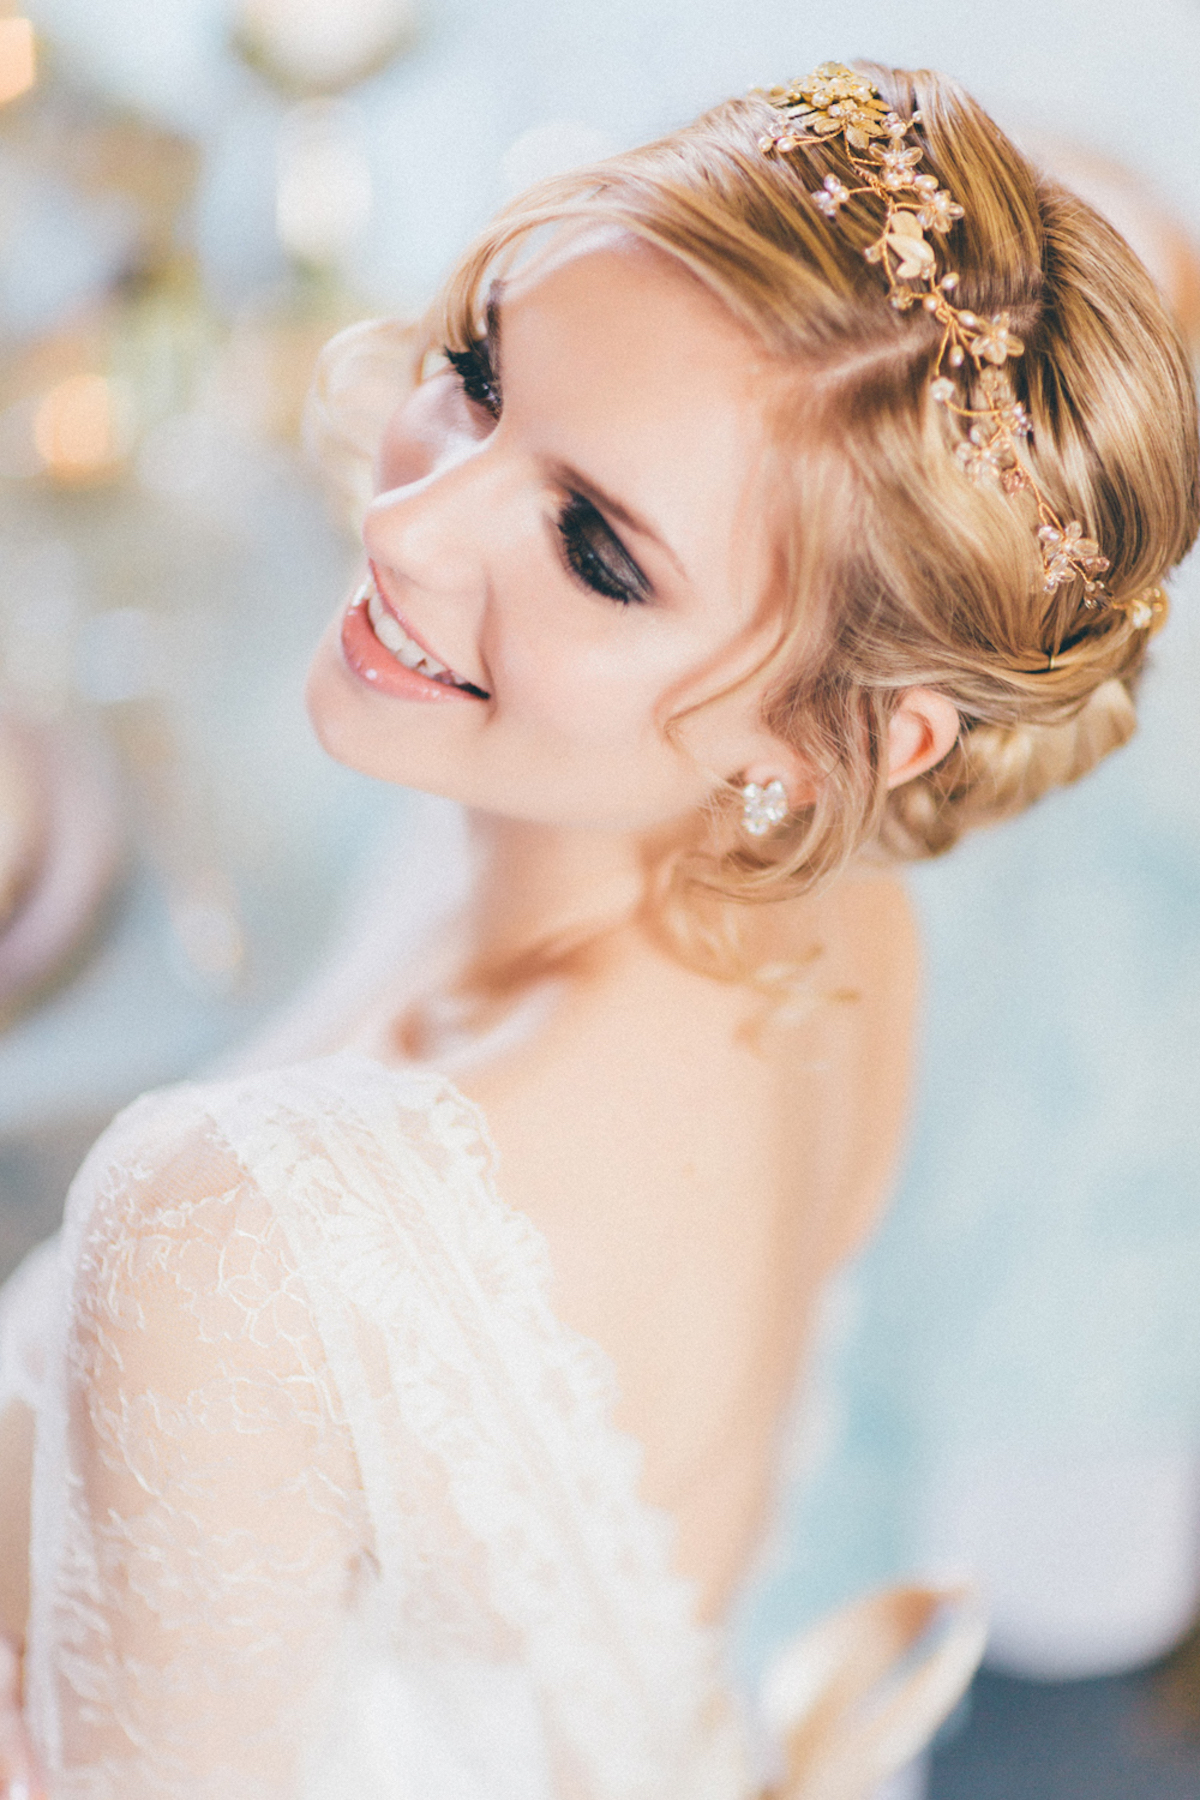 Beautiful bridal hair and makeup from Lipstick & Curls, who now offer nationwide coverage